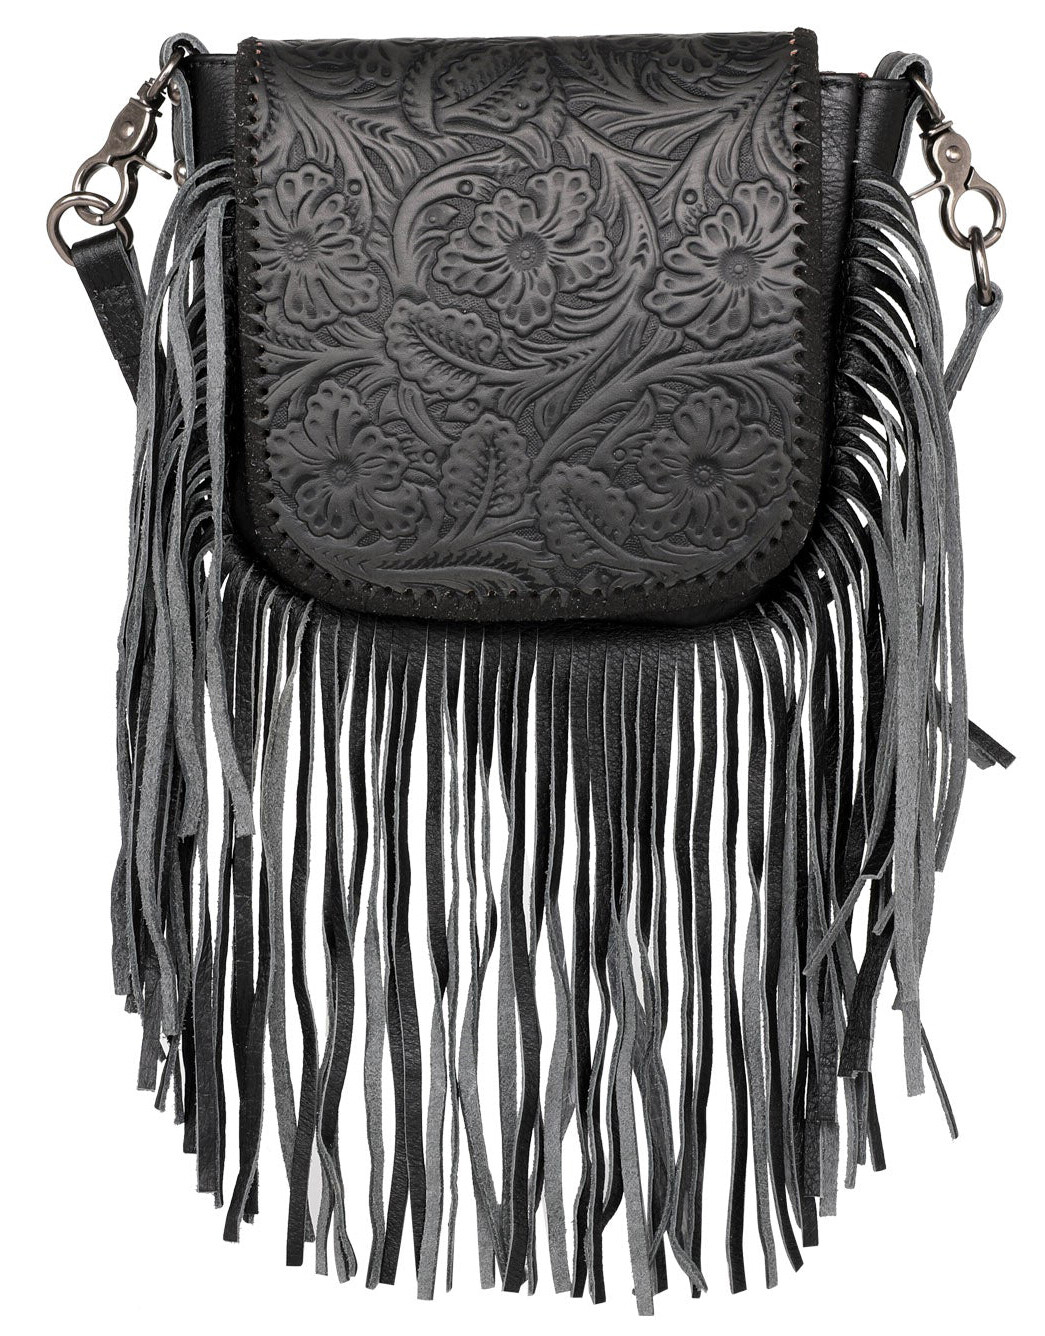 Purse - Crossbody Genuine Leather Floral Tooled - BLK